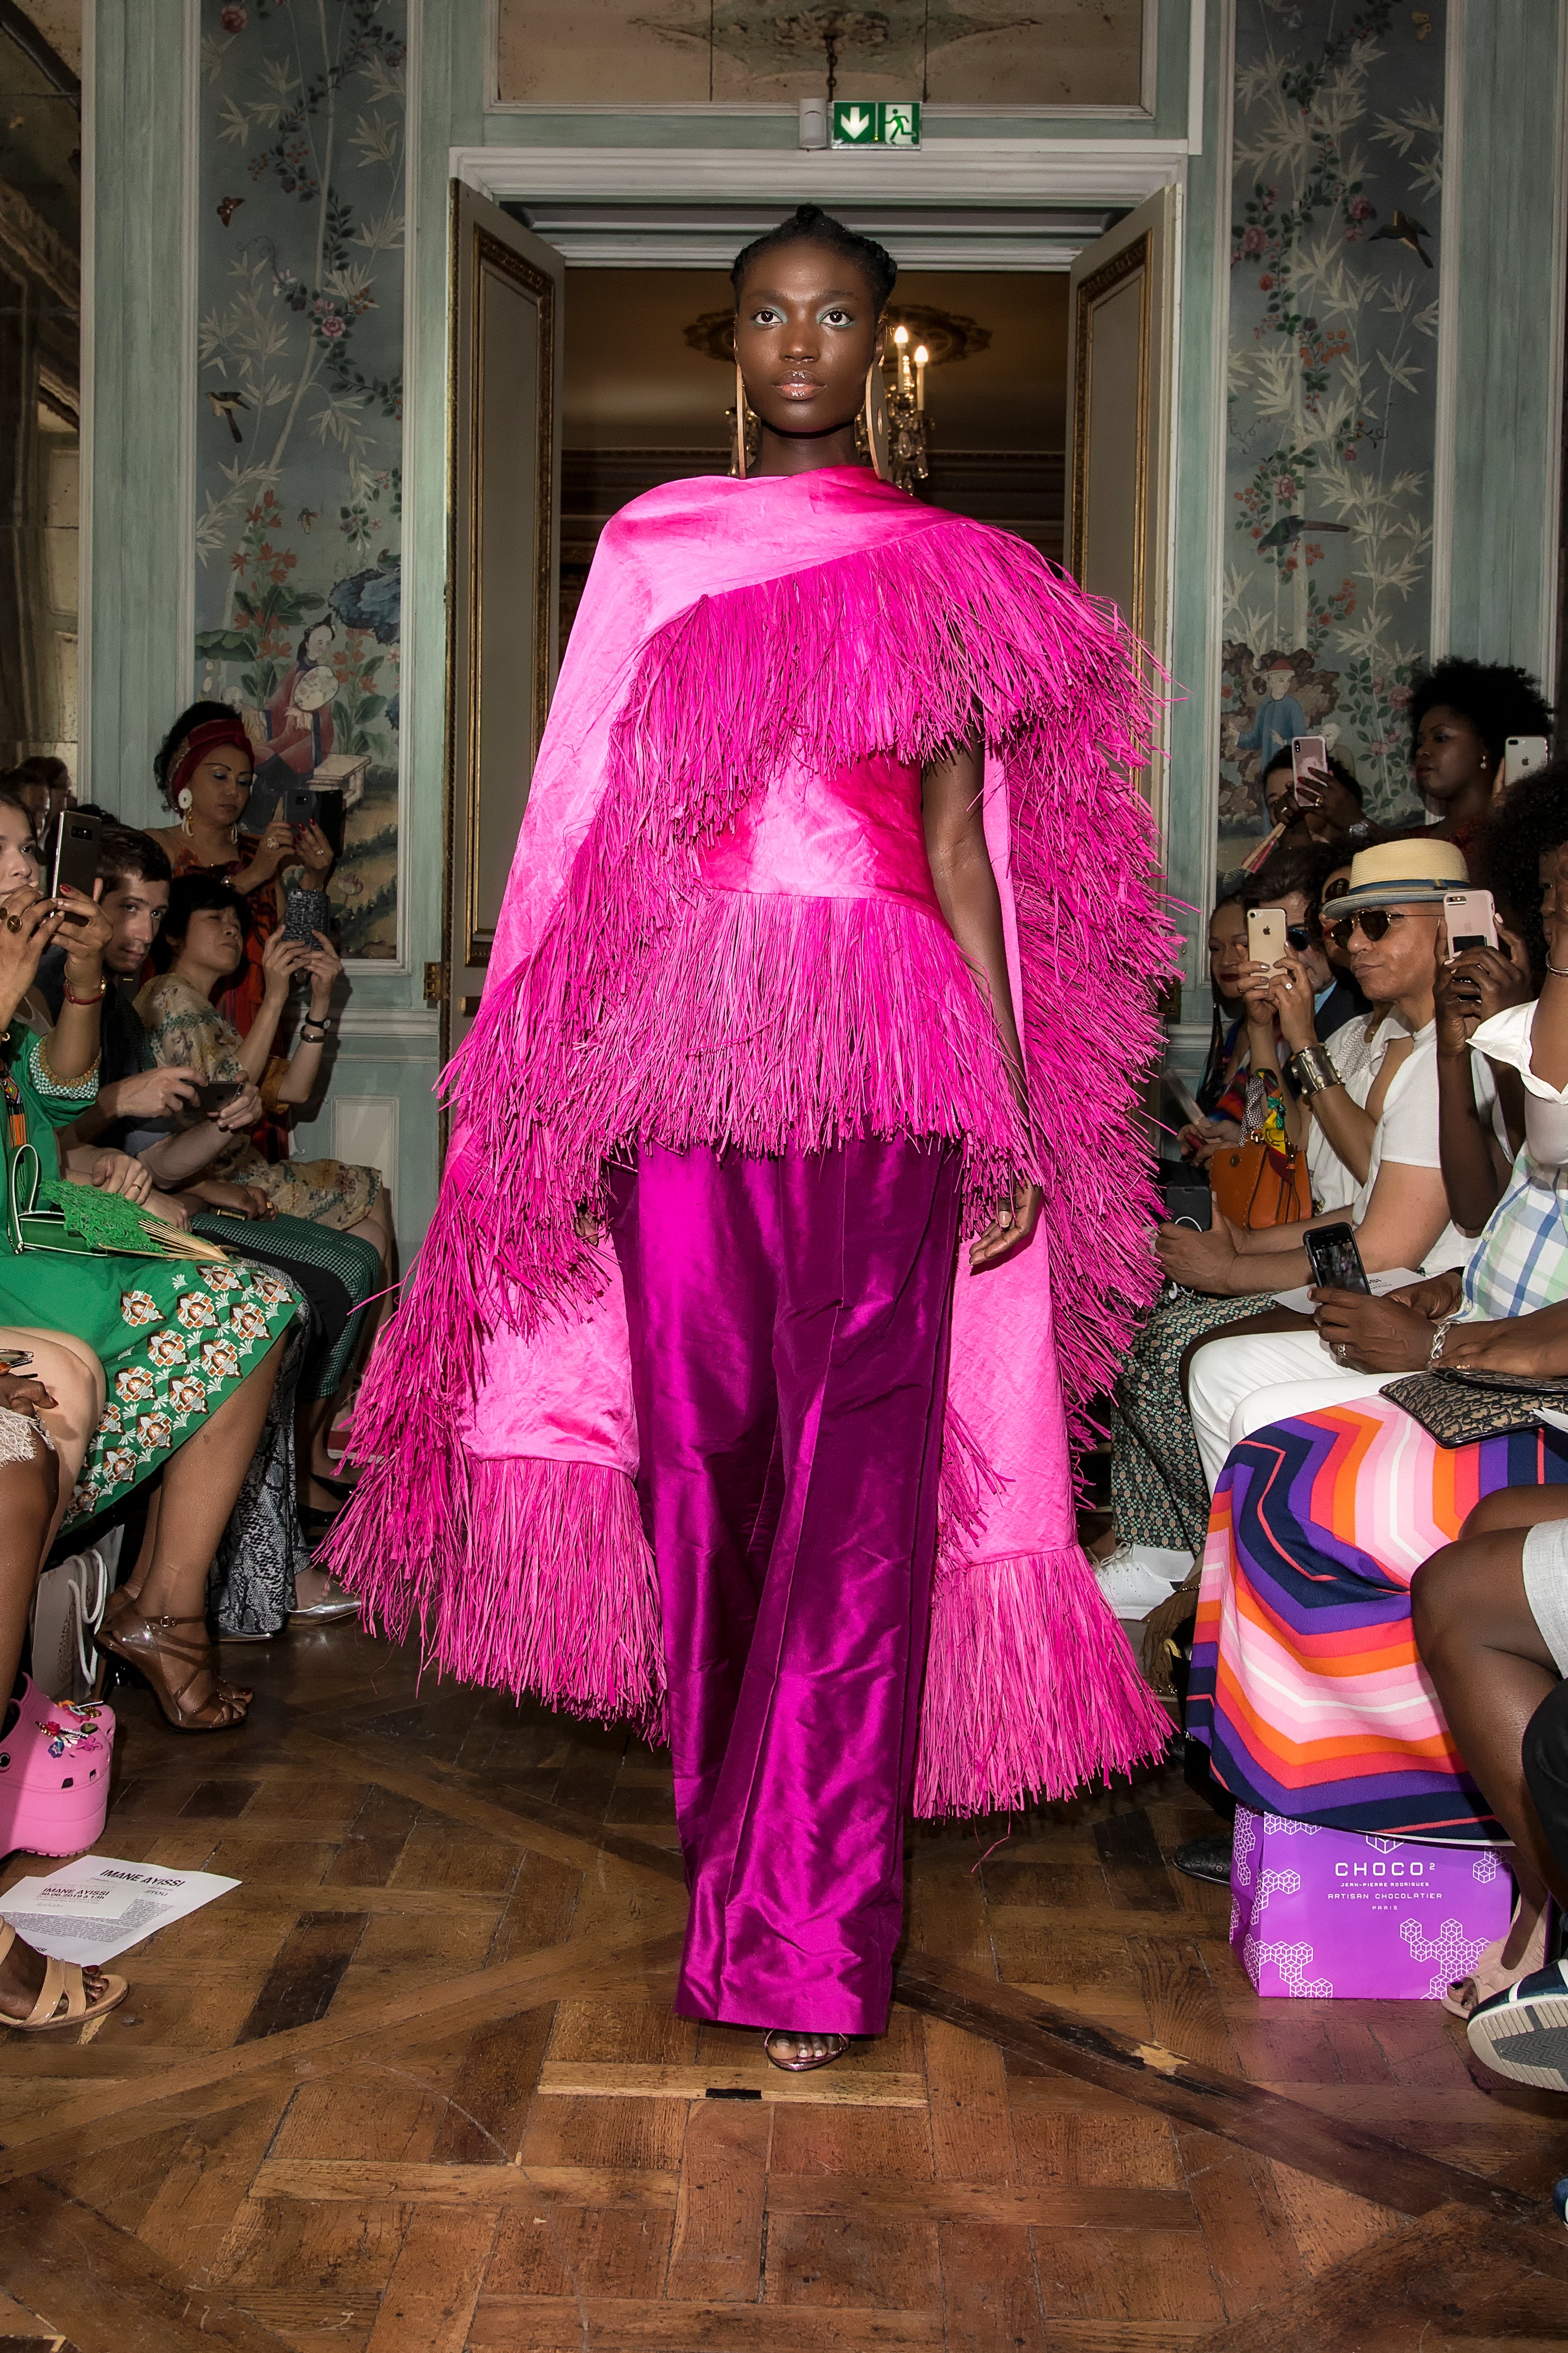 Mbeuk Idourrou collection, Imane Ayissi, Paris, France, AutumnWinter 2019 - An image taken from the forthcoming Africa Fashion exhibition at London’s V&A